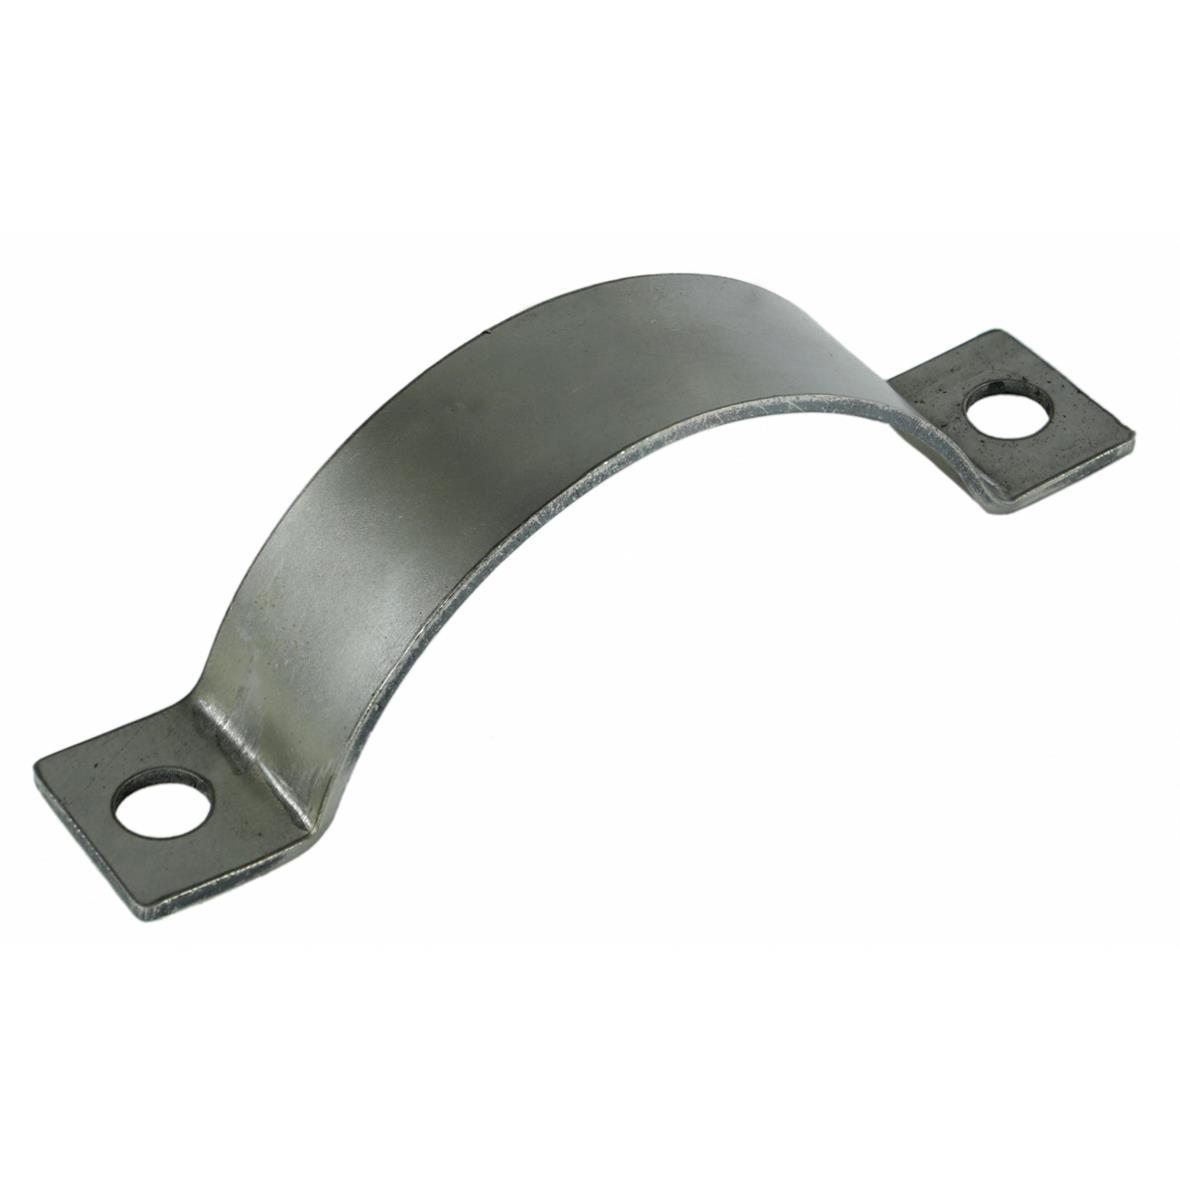 Vespa 50 Special steering cover fixing bracket